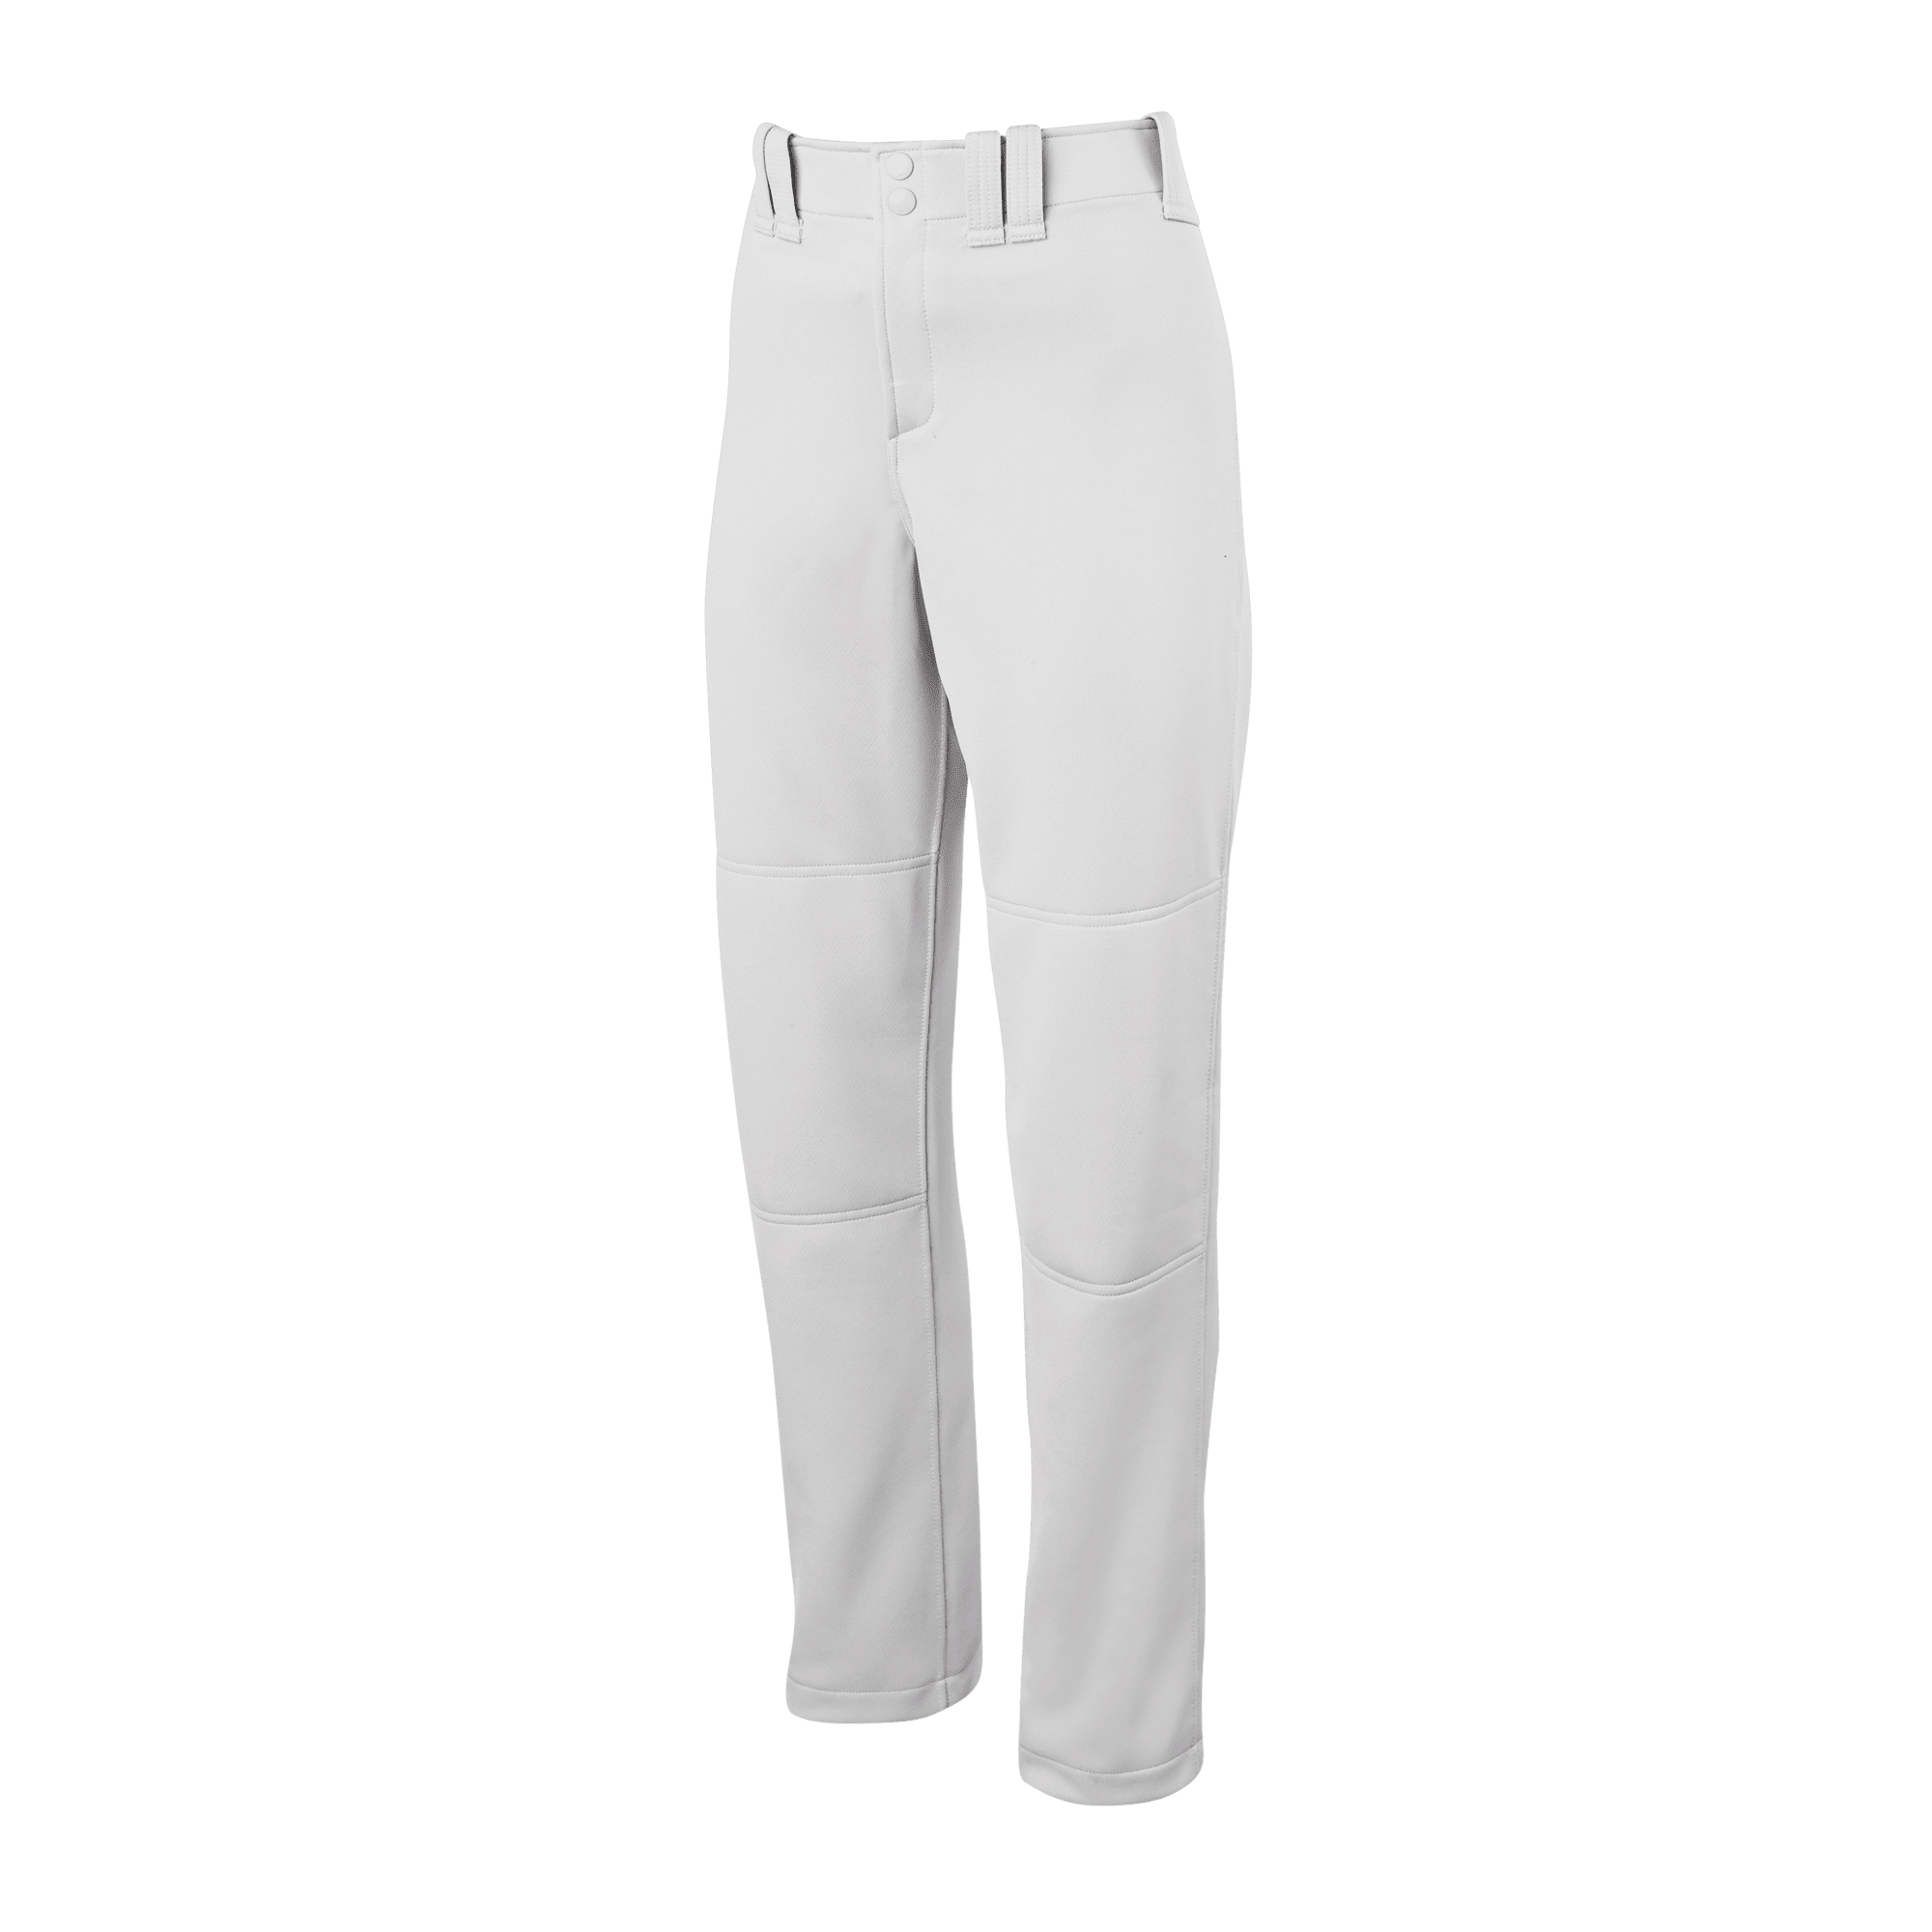 DeMarini Women's Adult Uprising Fastpitch Softball Pant D3077 Belted 